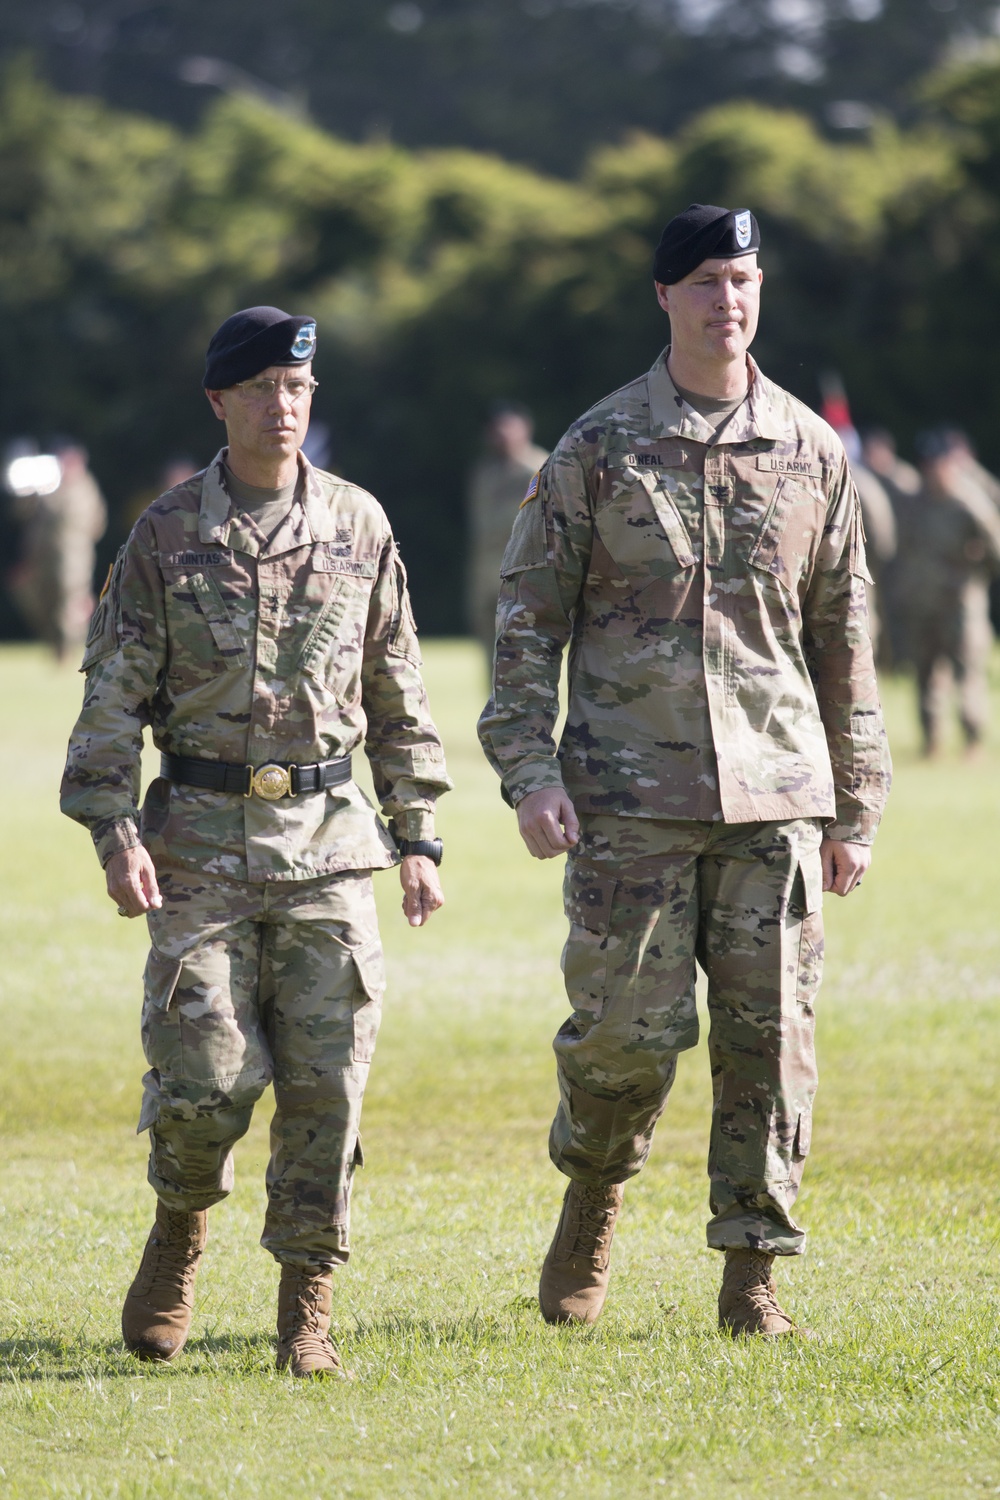 2nd Armored Brigade Combat Team, 3rd Infantry Division Change of Command